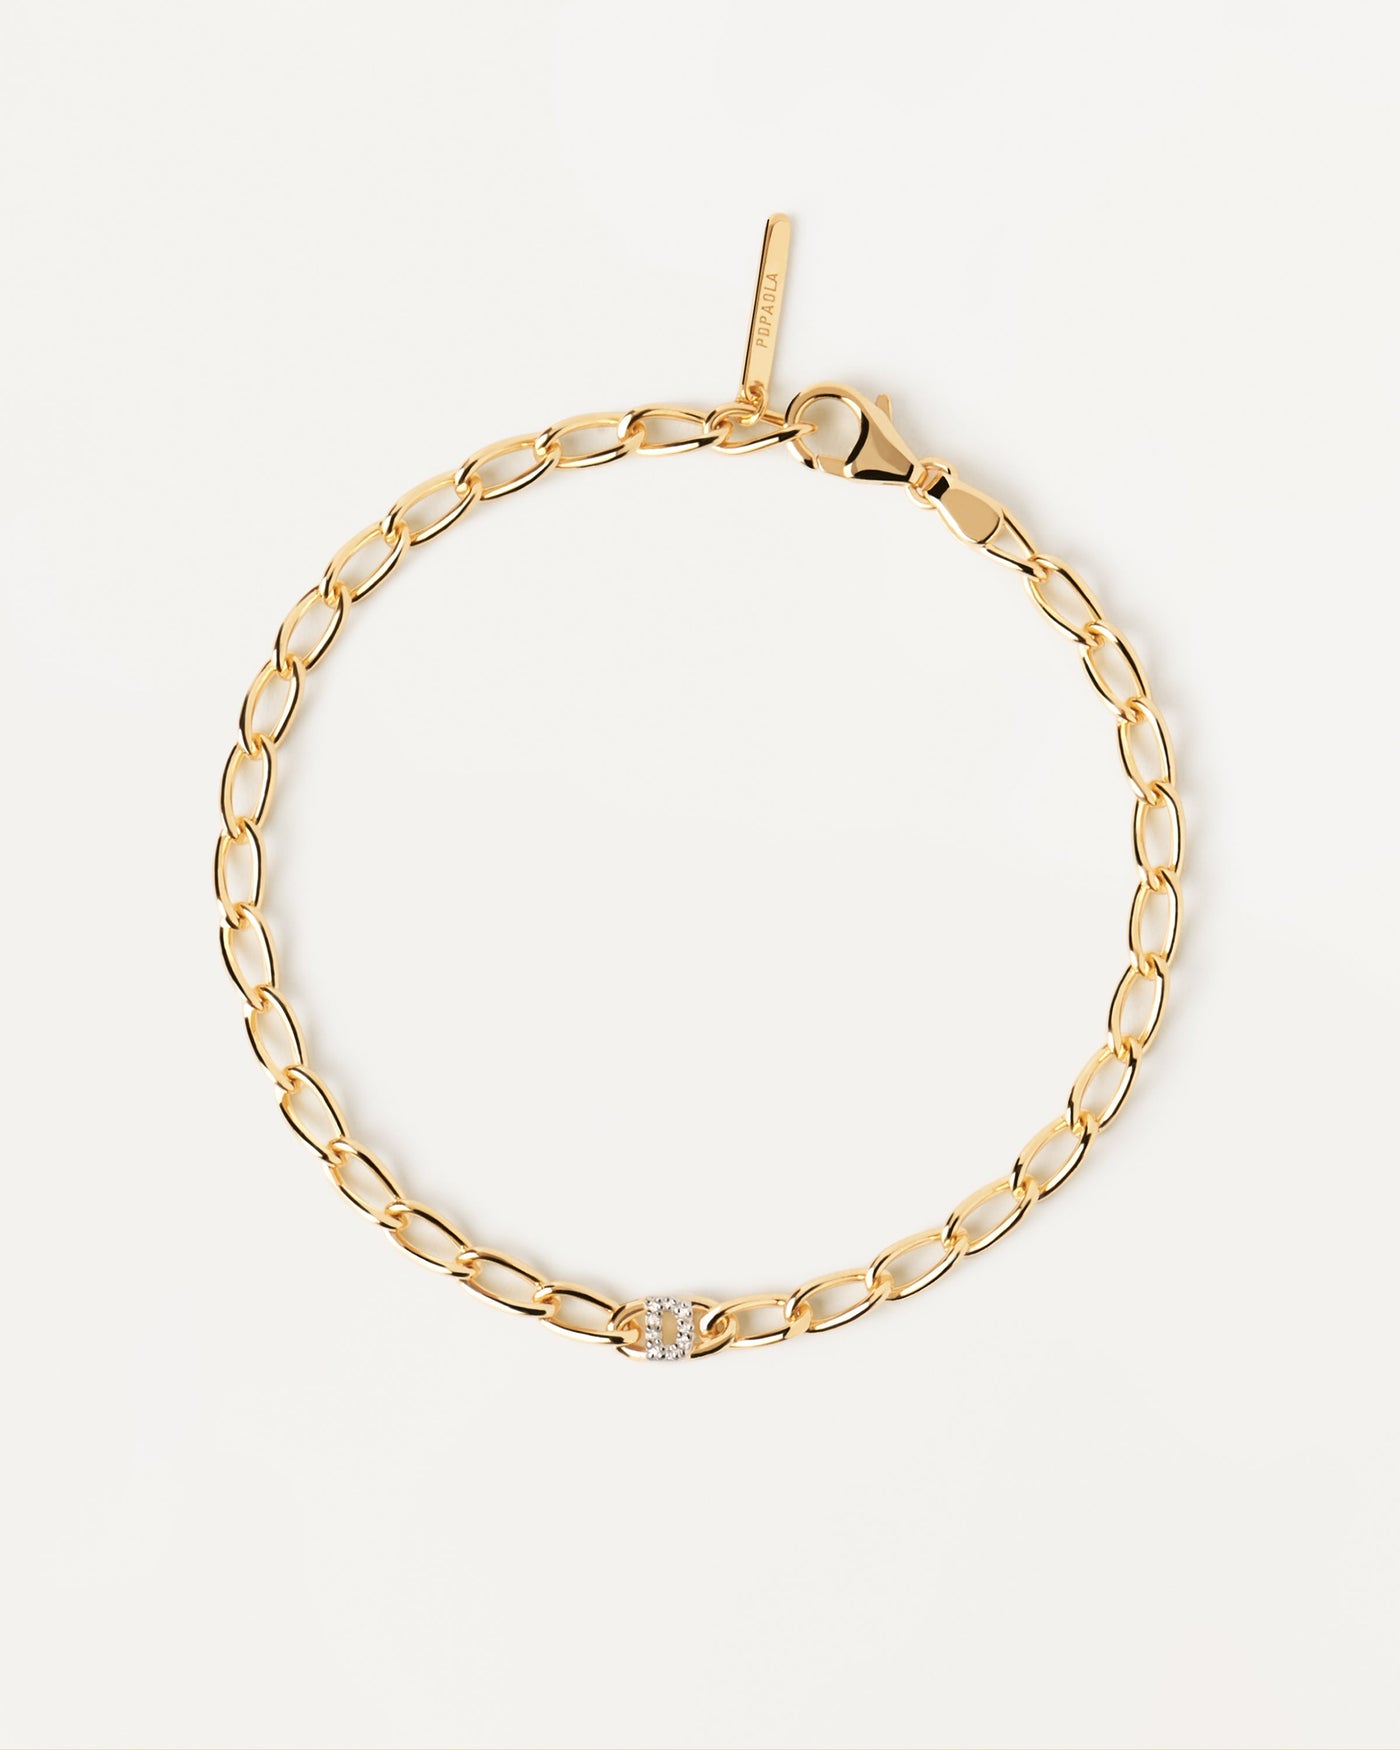 2023 Selection | Letter D Chain Bracelet. cable chain bracelet in gold-plated silver with initial D in zirconia. Get the latest arrival from PDPAOLA. Place your order safely and get this Best Seller. Free Shipping.